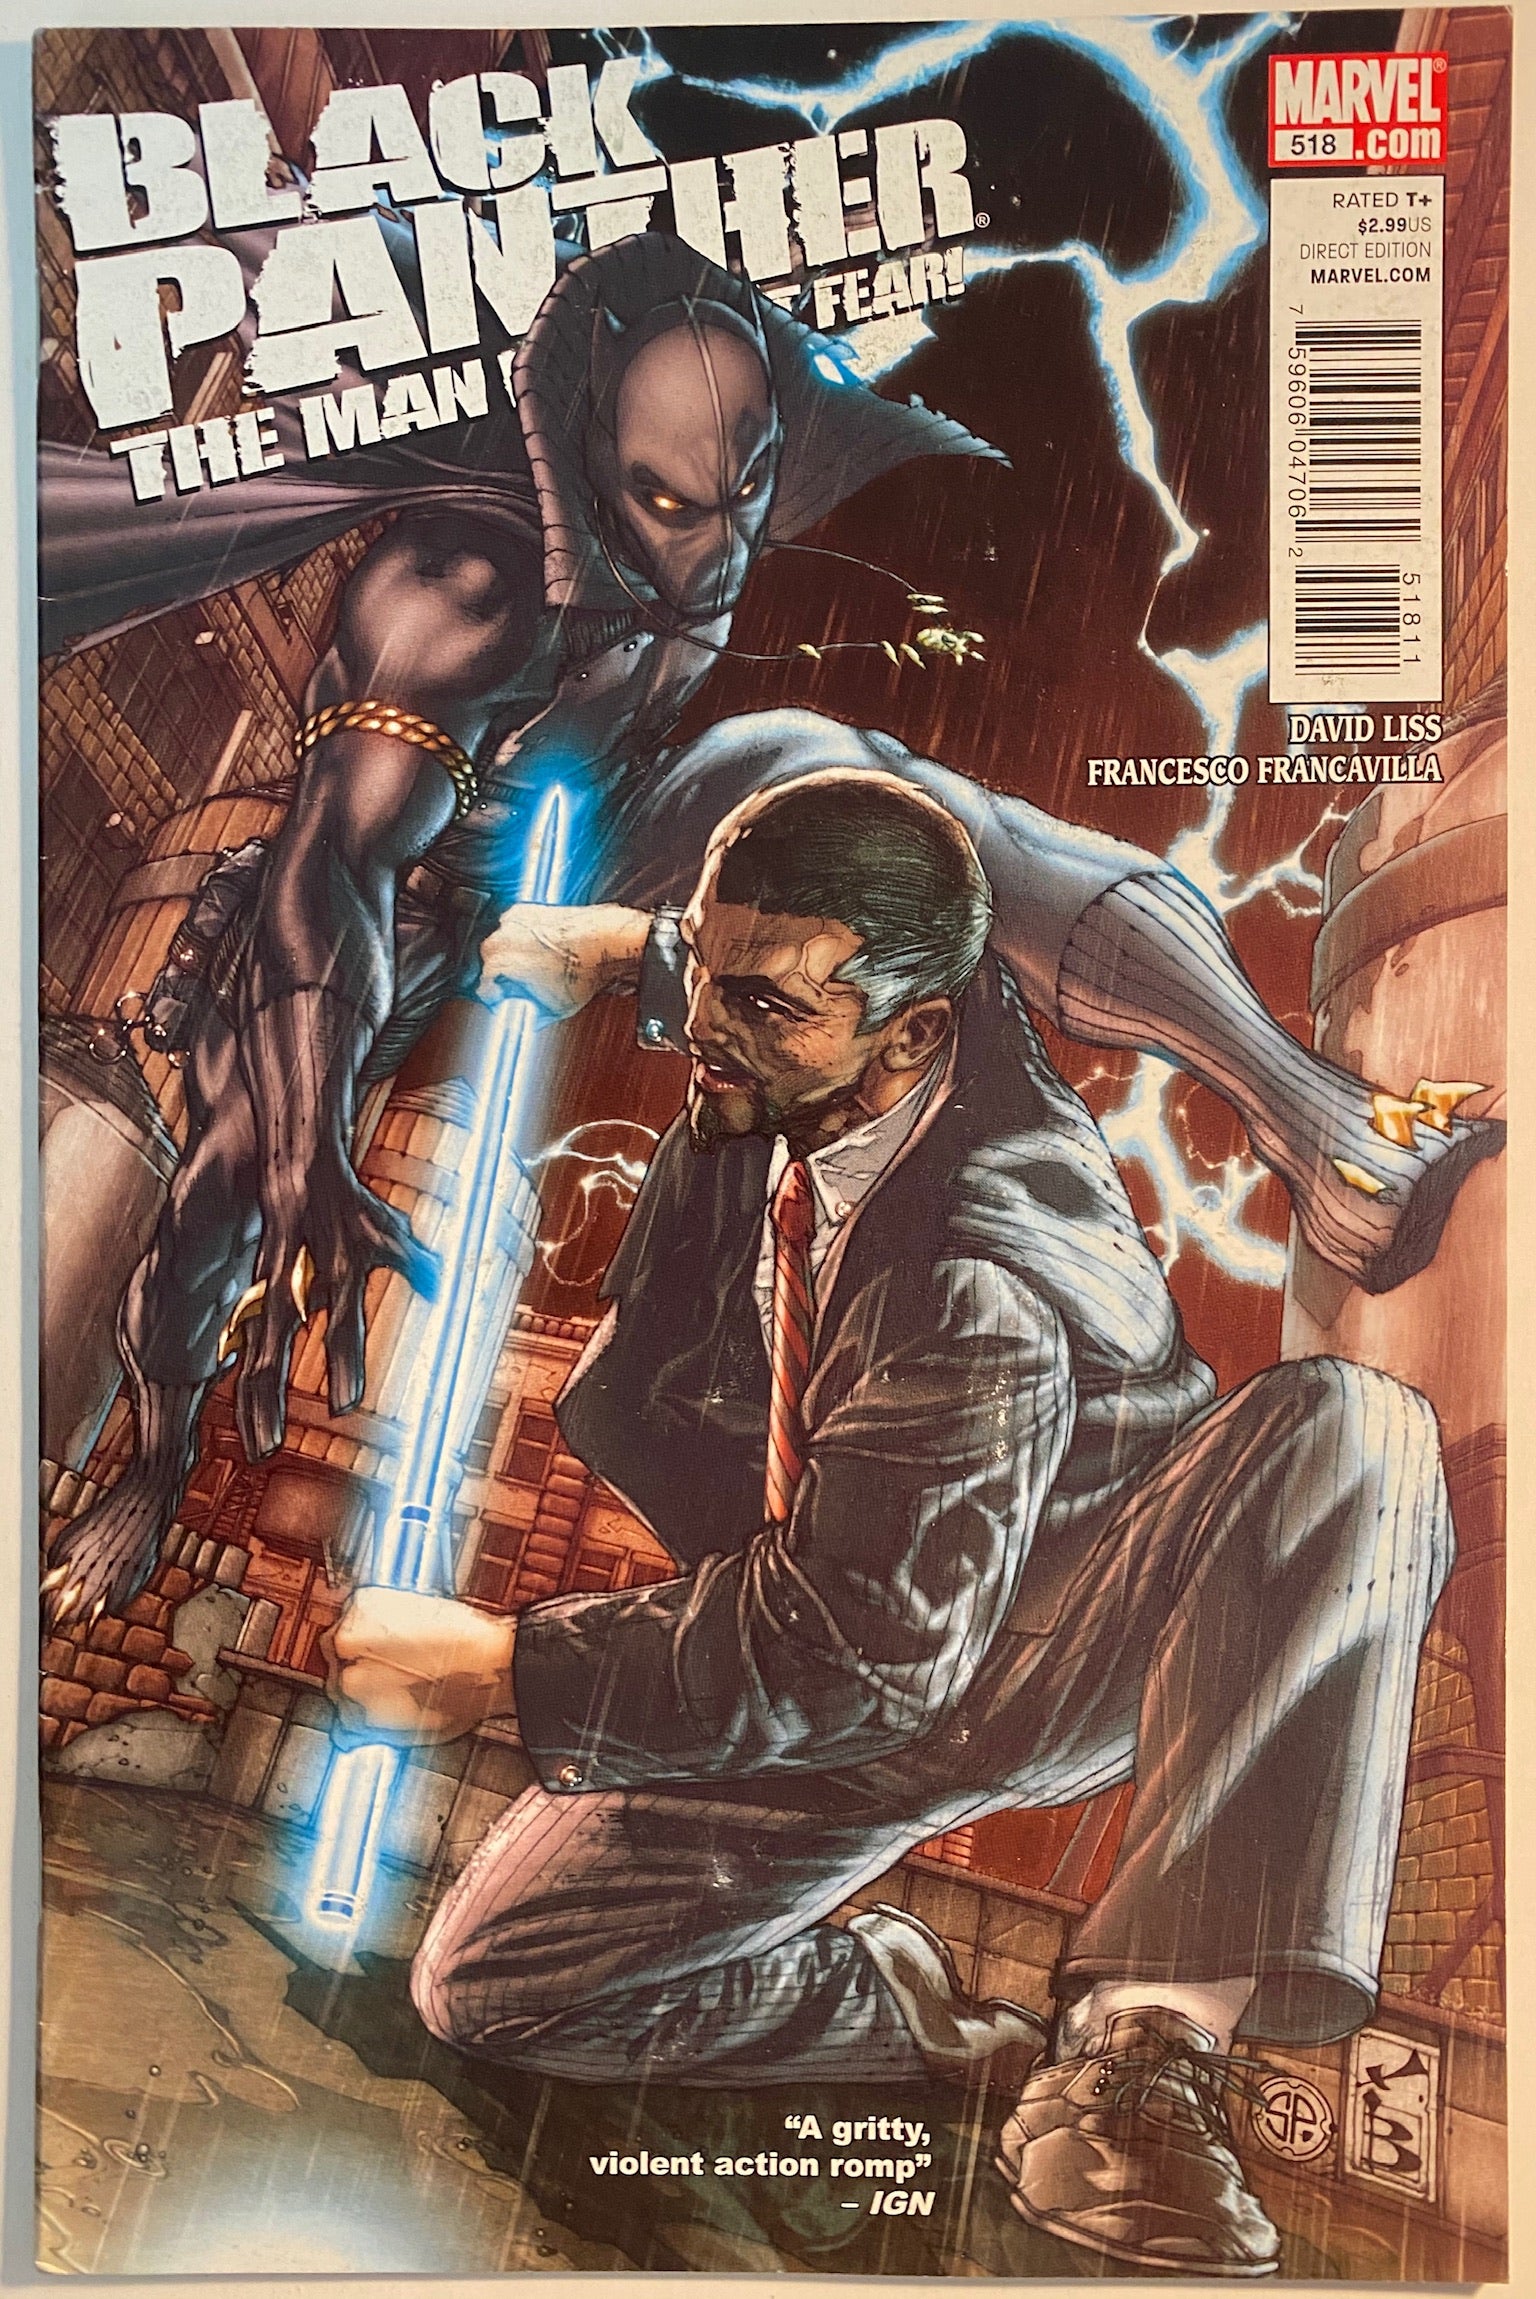 BLACK PANTHER: THE MAN WITHOUT FEAR 518